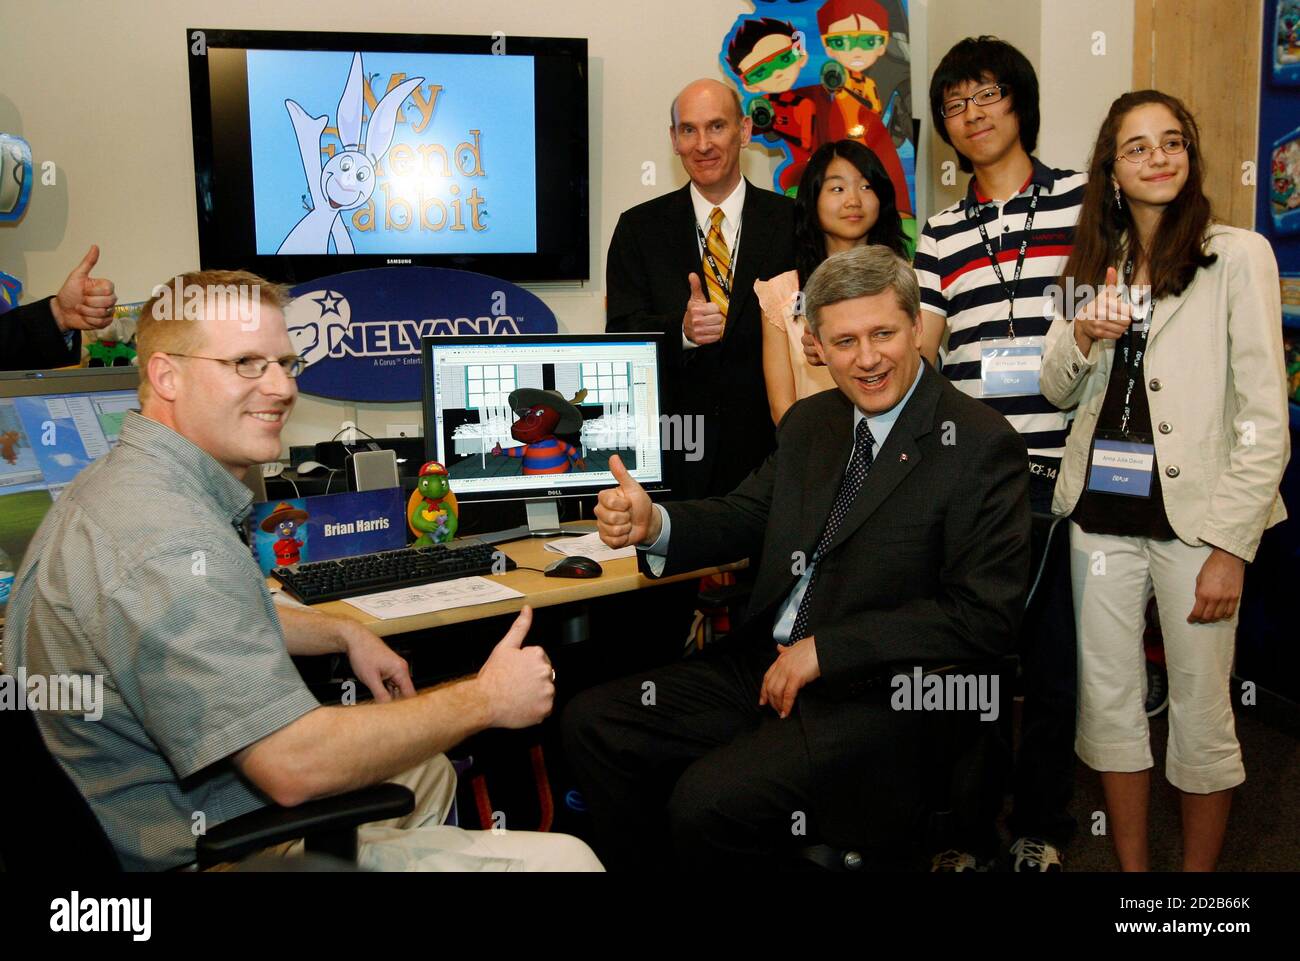 Canada's Prime Minister Stephen Harper (seated R) poses with Nelvana Animation Supervisor Brian Harris (L), General Manager Scott Dyer (rear) and students from Althouse Middle School before touring the Nelvana Studio in Toronto April 18, 2008. REUTERS/ Mike Cassese   (CANADA) Stock Photo